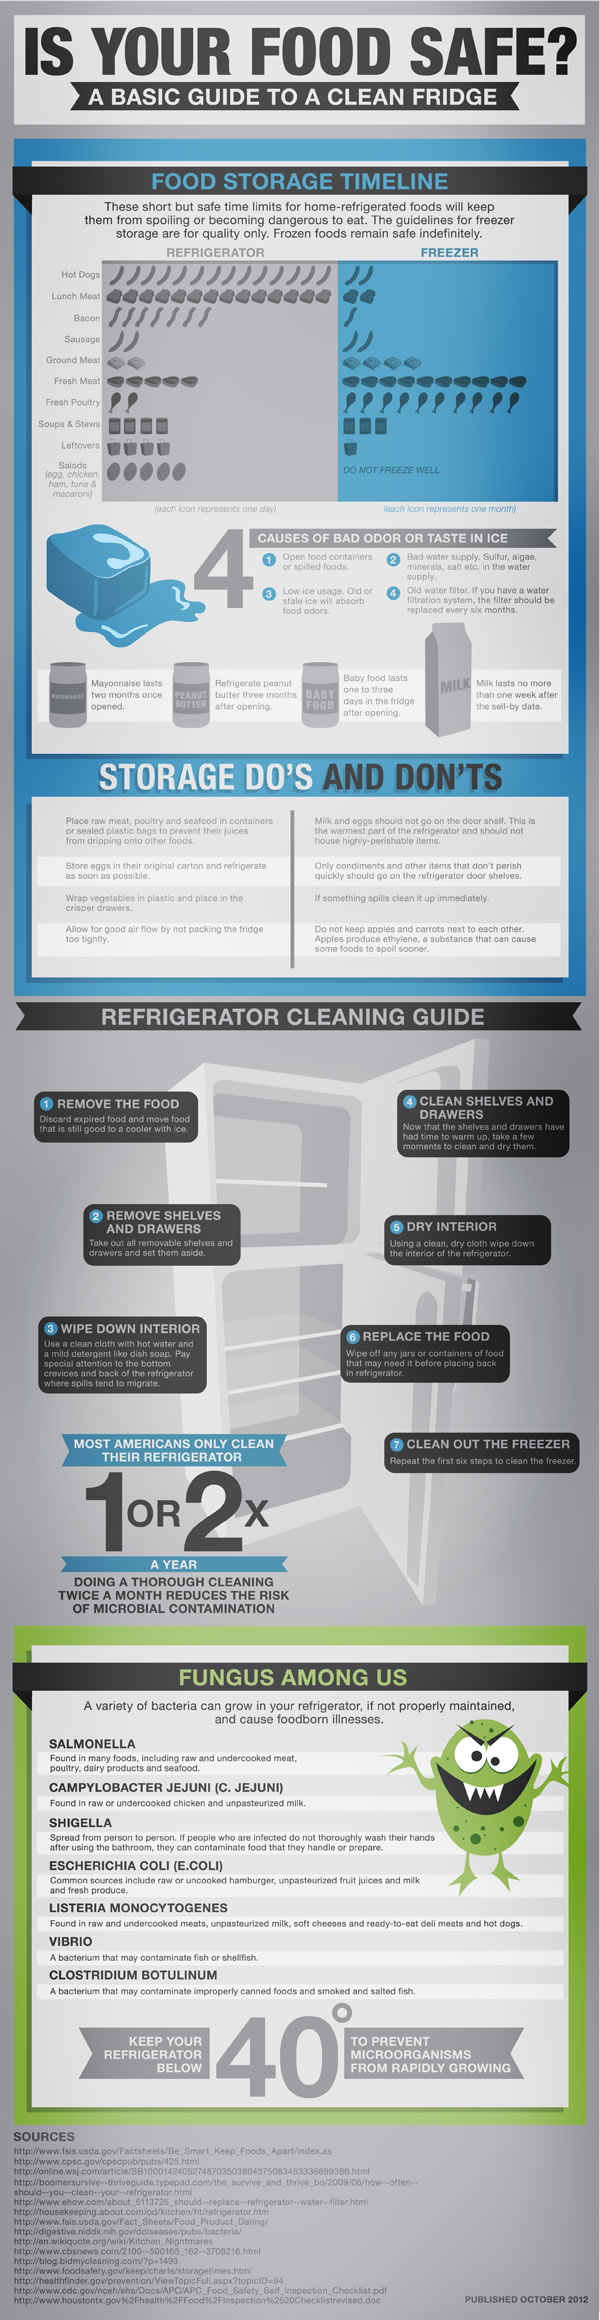 Guide to a Clean Fridge